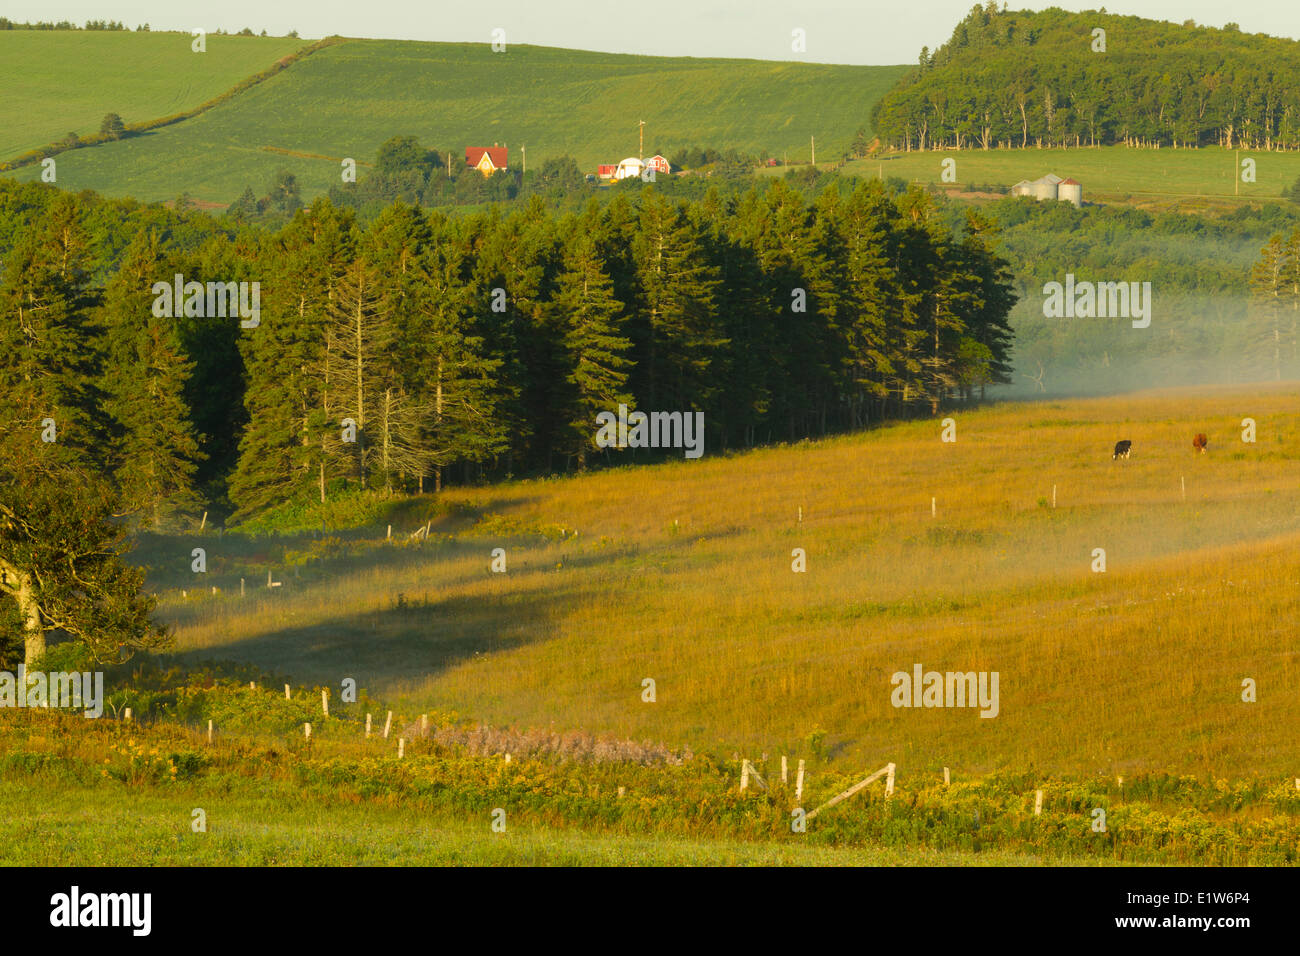 Cattle grazing, Pleasant Valley, Prince Edward Island, Canada Stock Photo